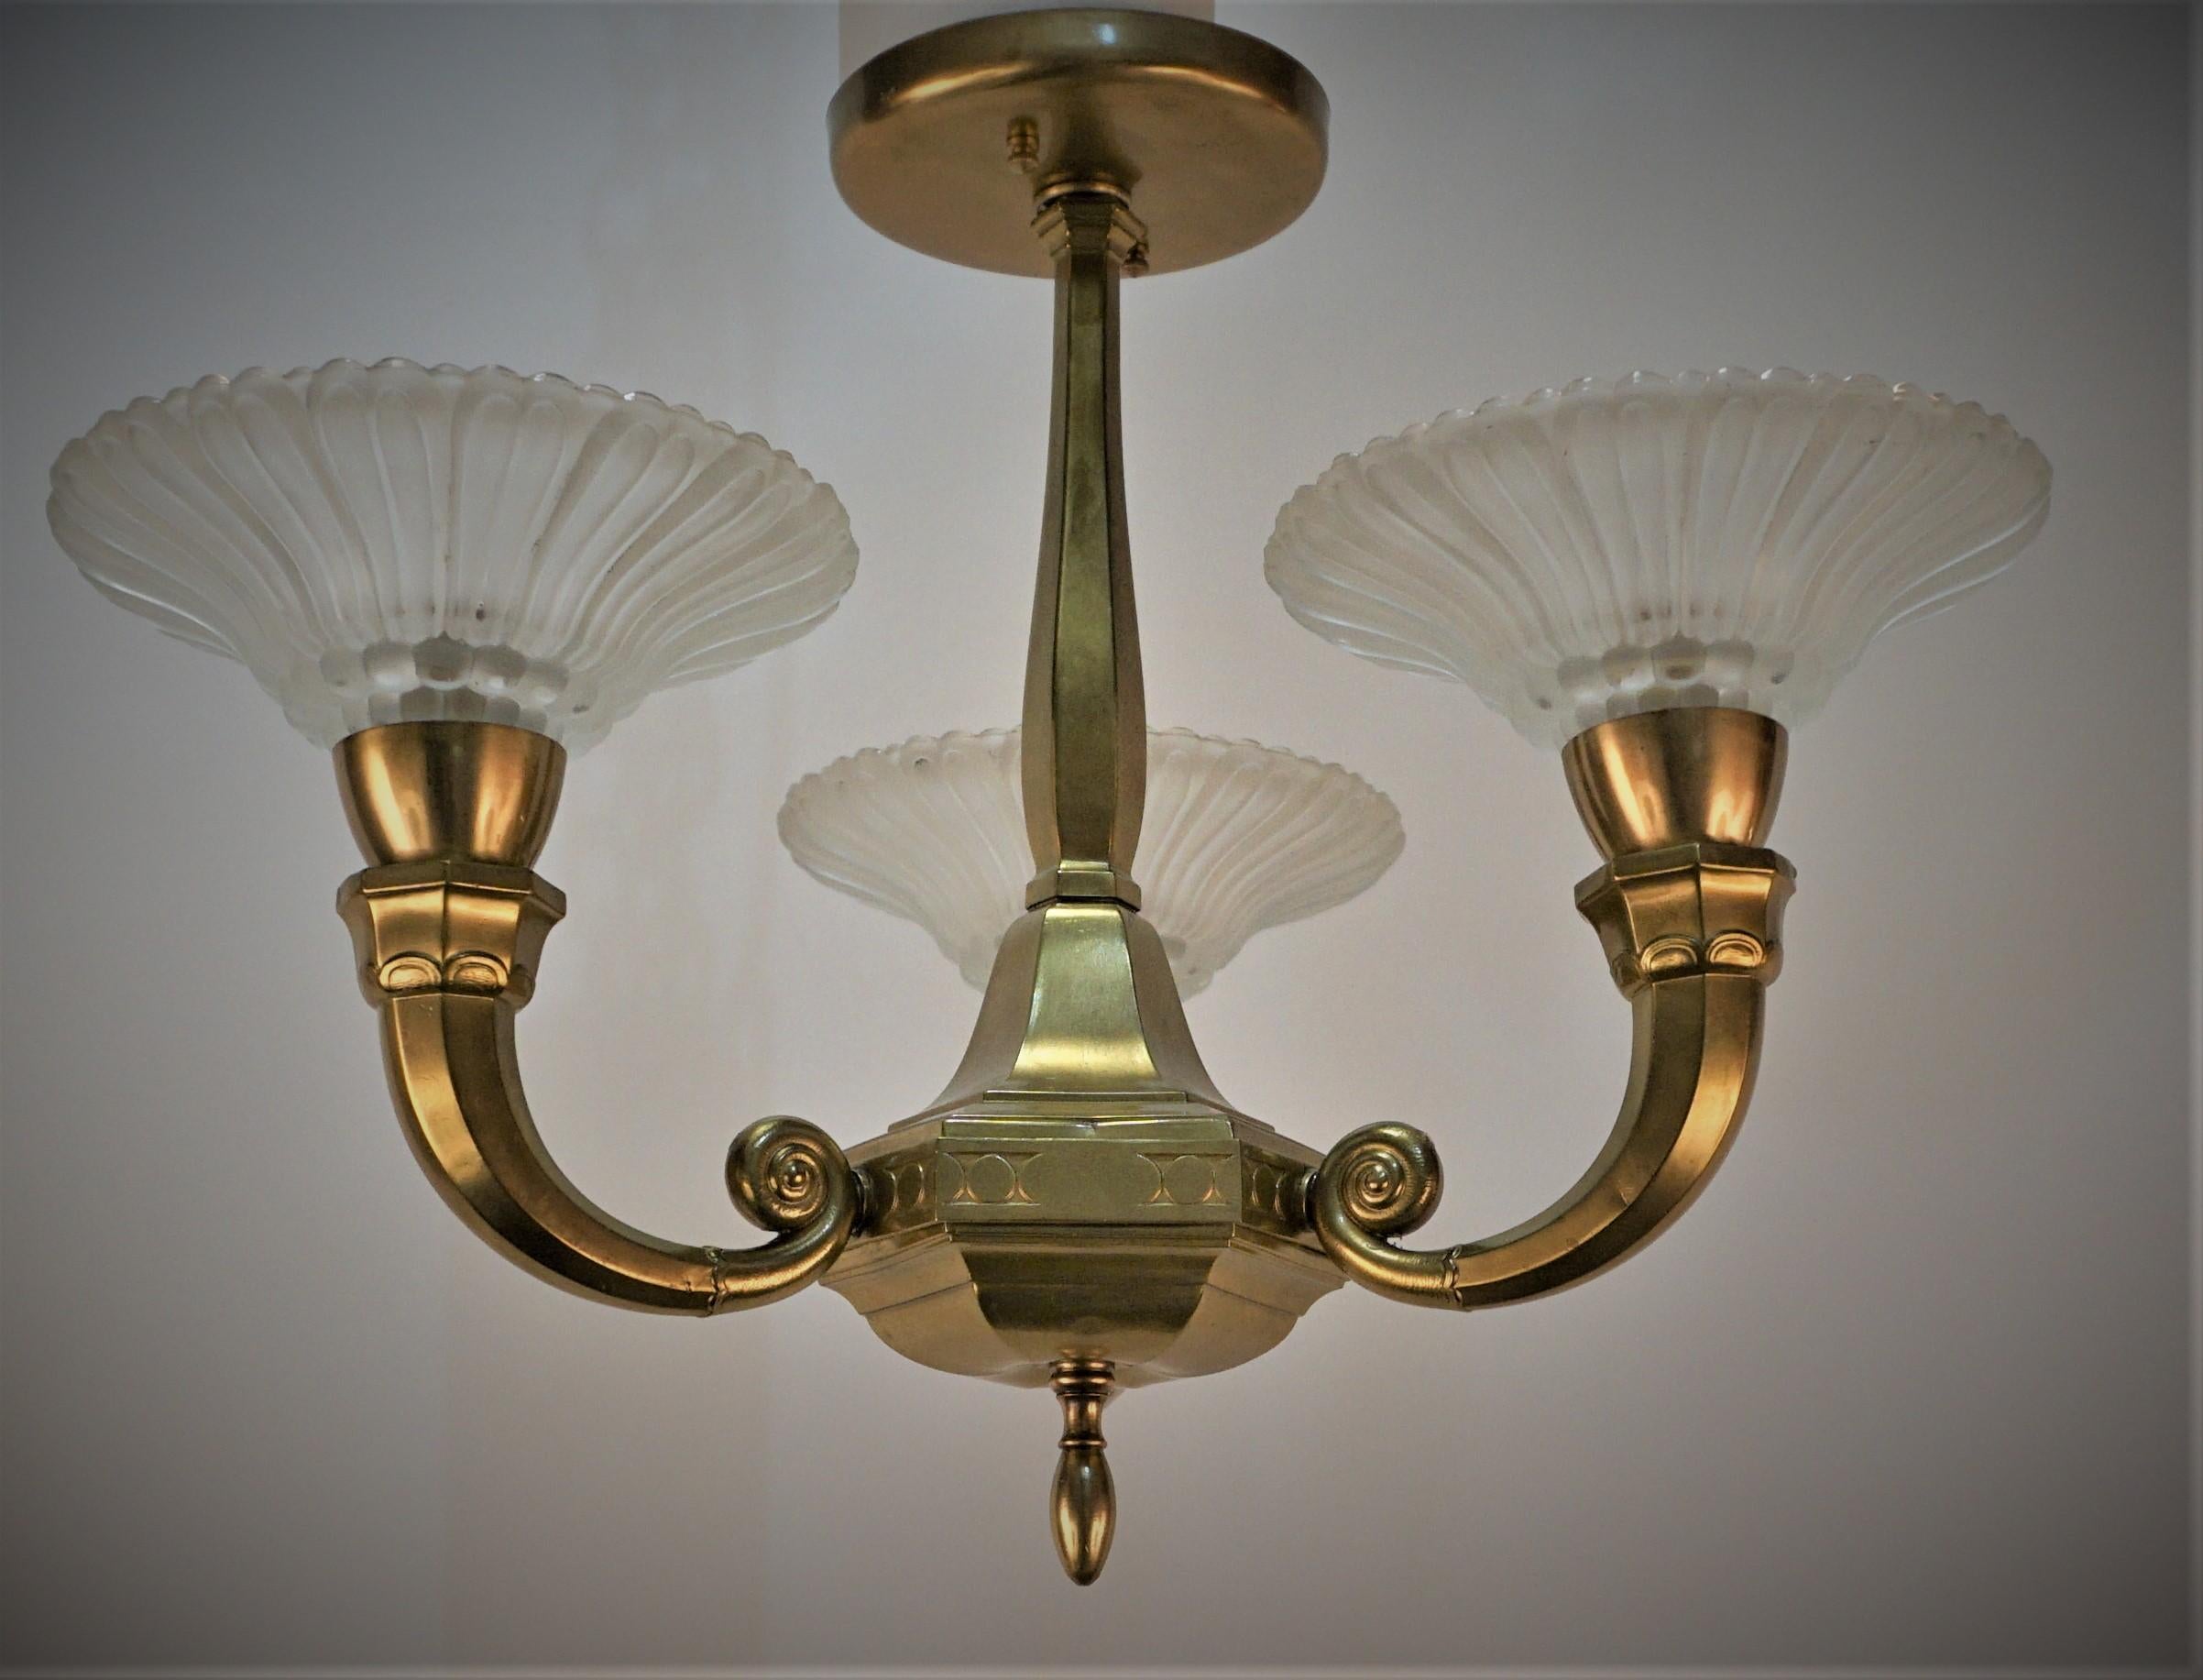 Semi flush mount three light, clear frost glass with bronze frame art deco chandelier.
Professionally rewired and ready for installation.
100 watts max each light.